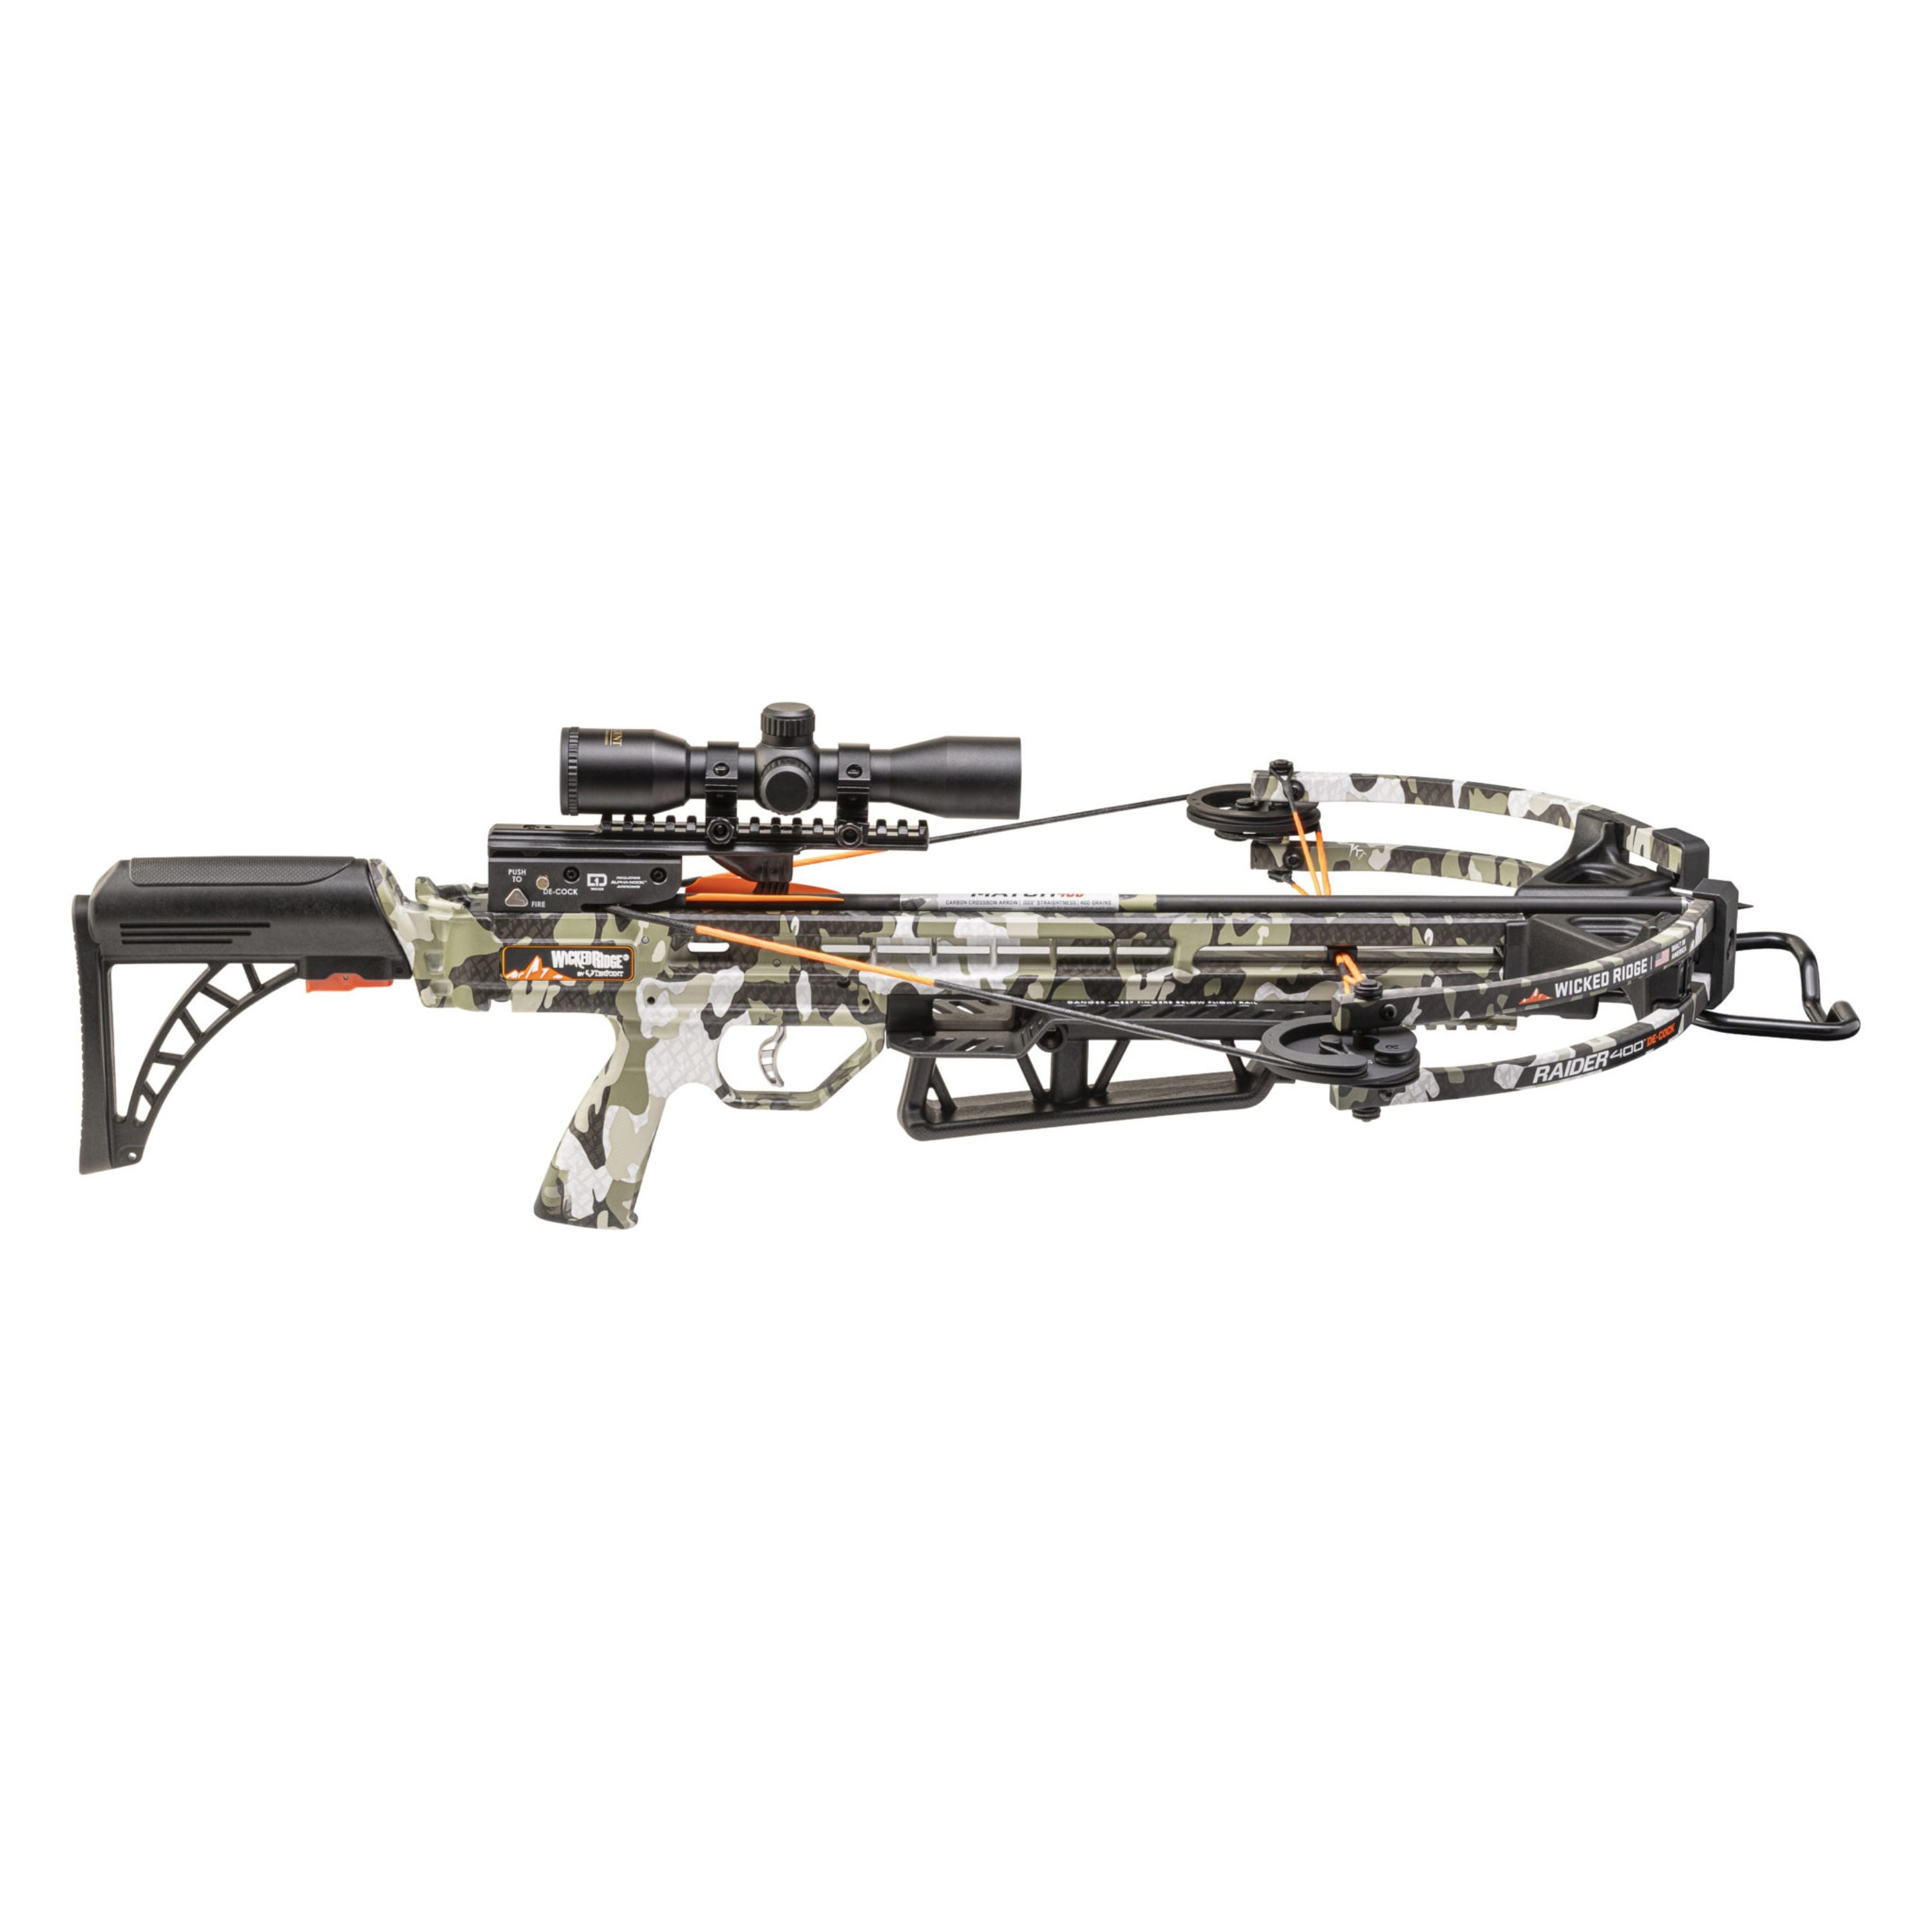 "Raider 400" De-cock crossbow with acudraw and scope